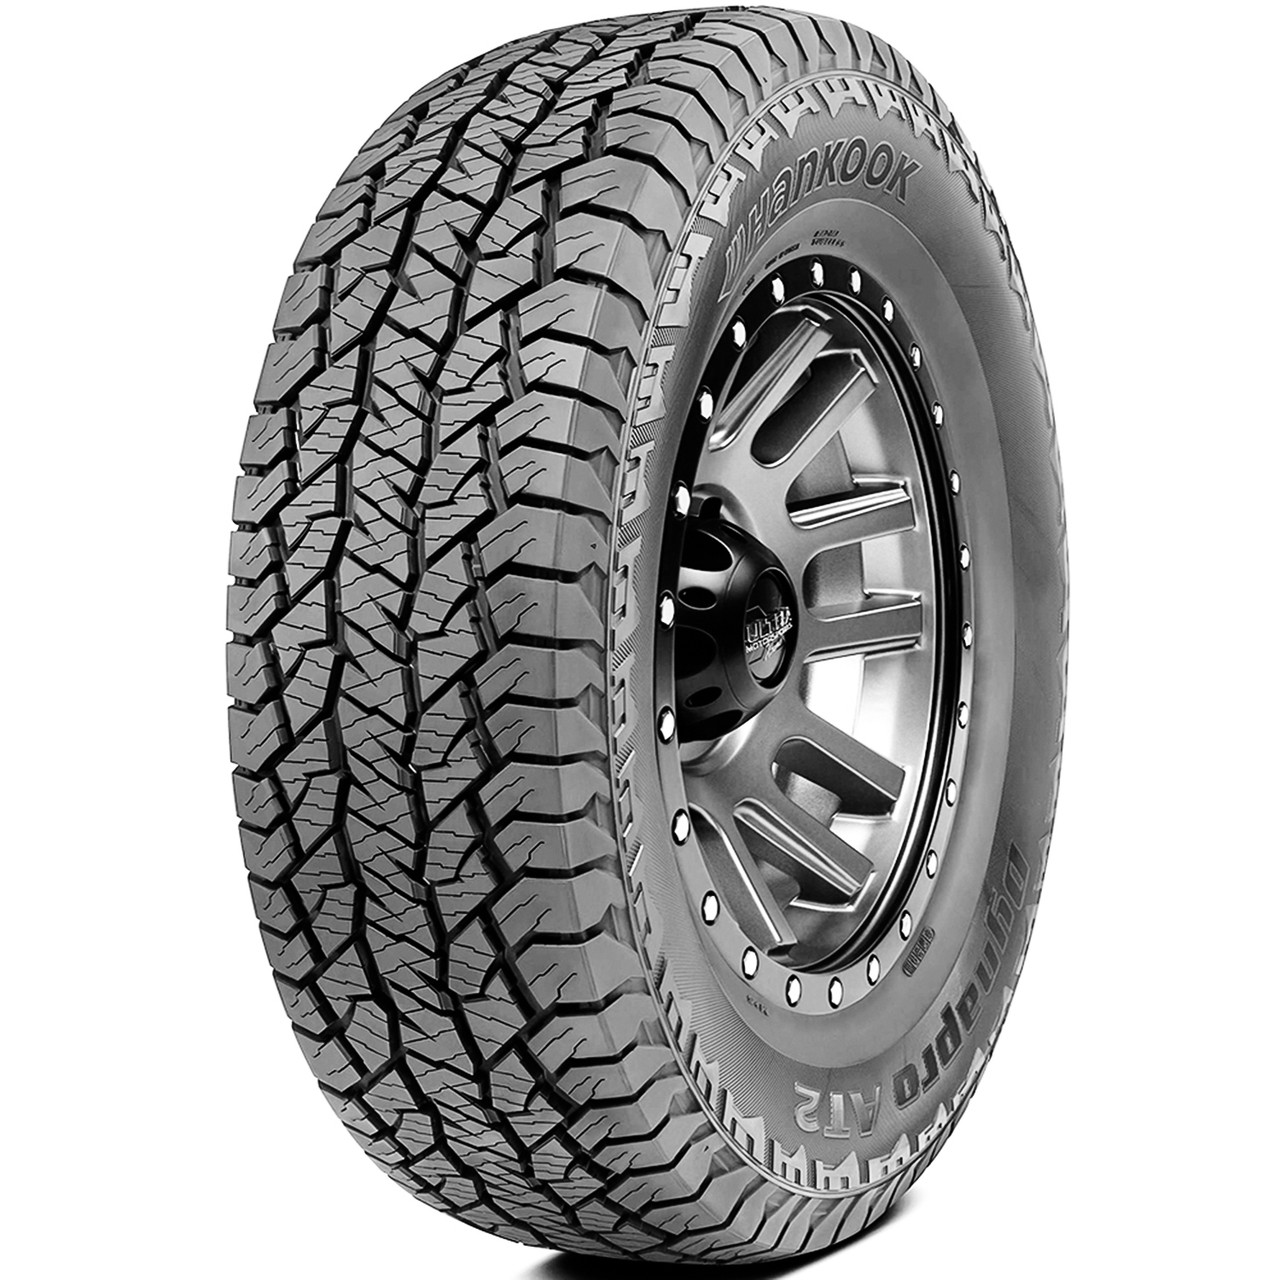 Photos - Motorcycle Tyre Hankook Dynapro AT2 295/55R20, All Season, All Terrain tires. 